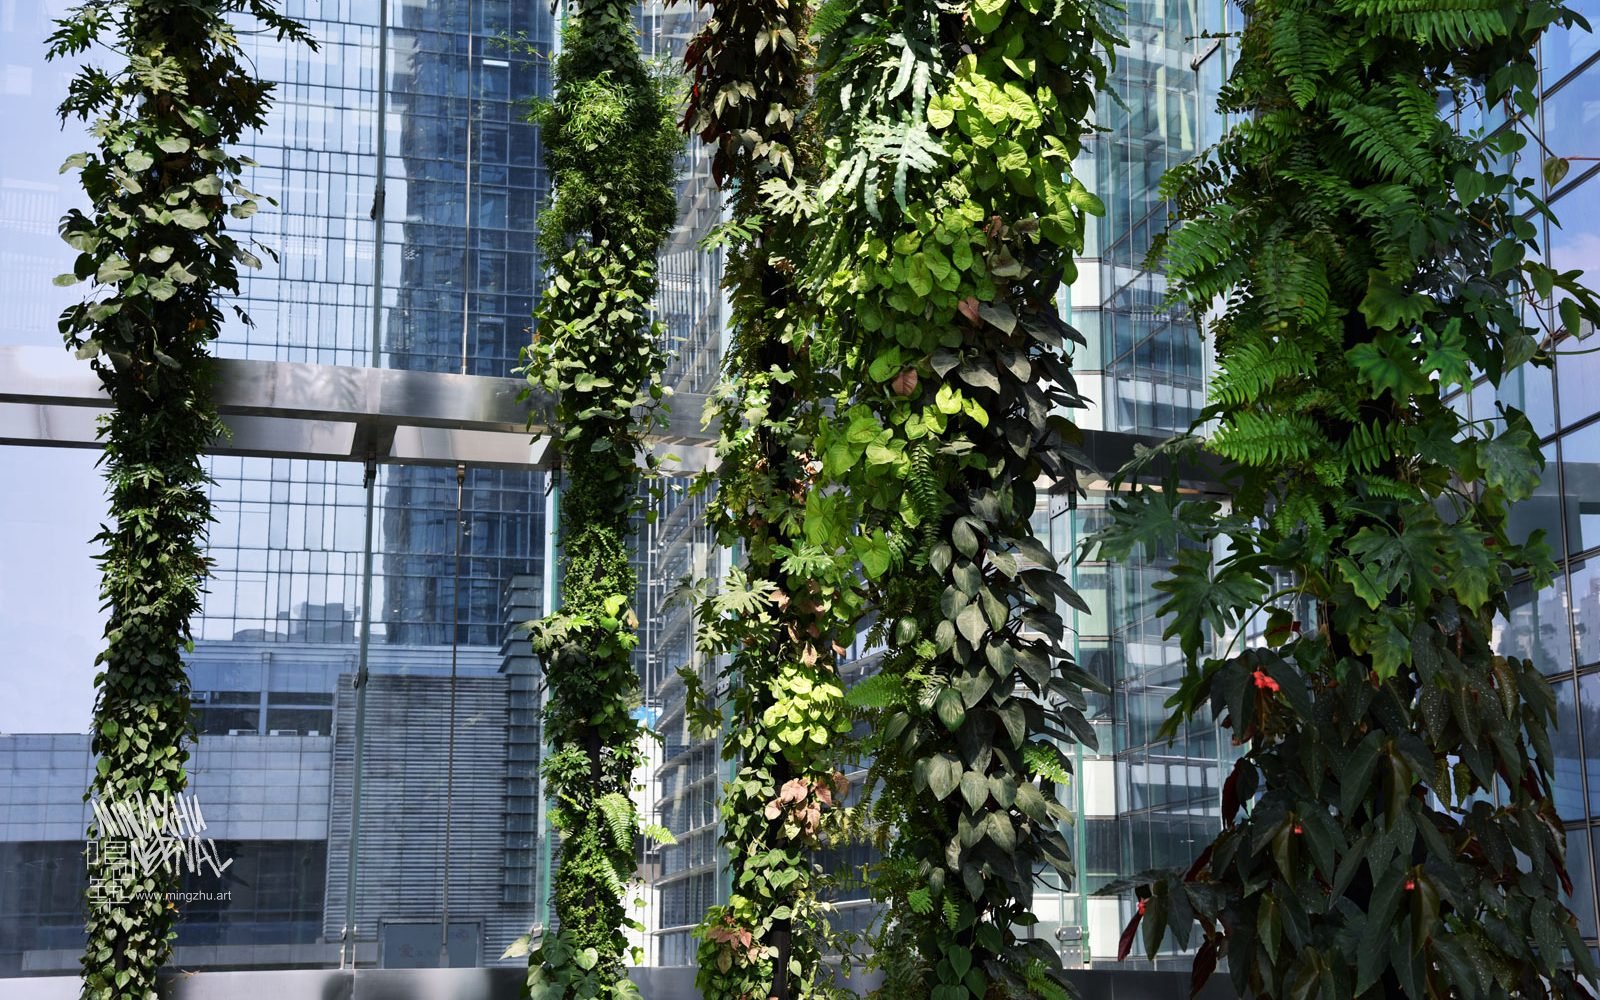 At Mingzhu Nerval, we thrive at creating the most beautiful vertical gardens in the world. For the SCC Tower, we created an impressive living wall design - Shenzhen, 2016.